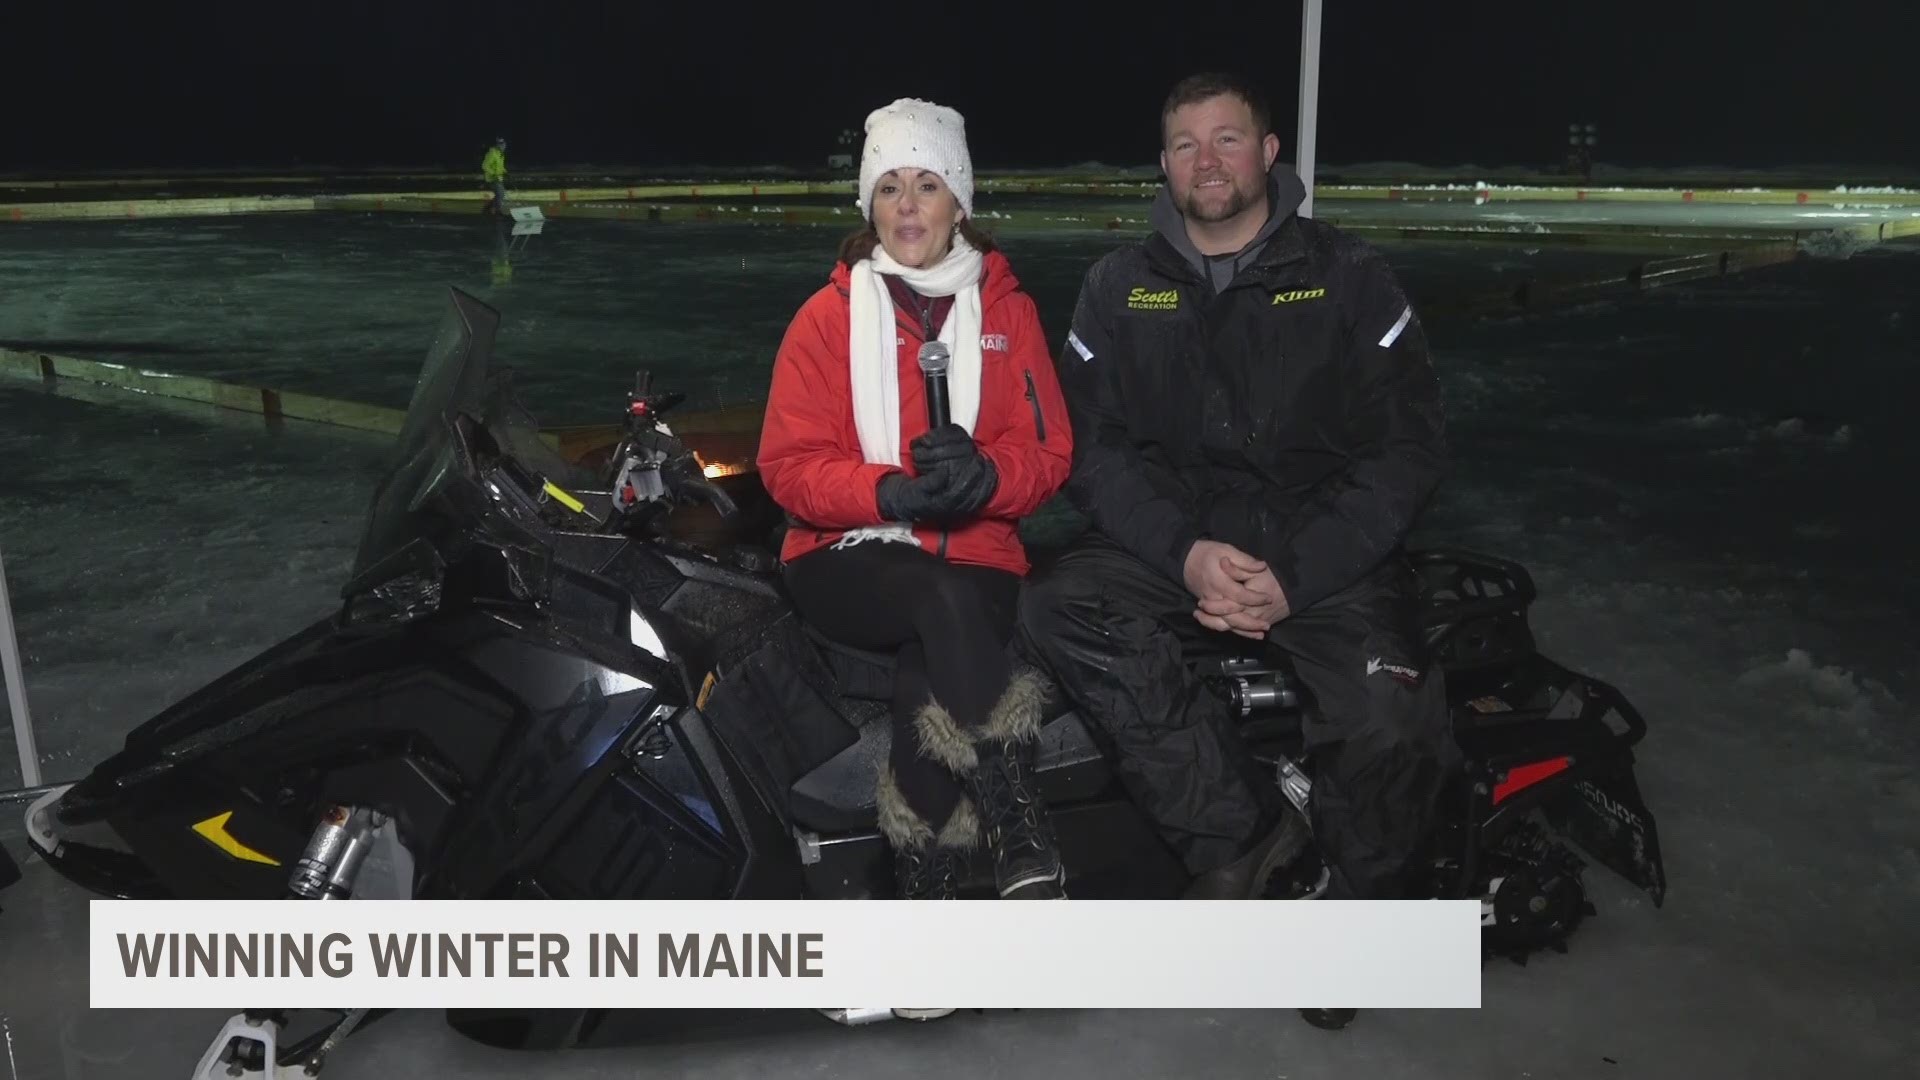 Snowmobiling in Maine is a great way to cure your winter blues. Tory Hemphill of Scotts Recreation in Manchester tells us about the sport.